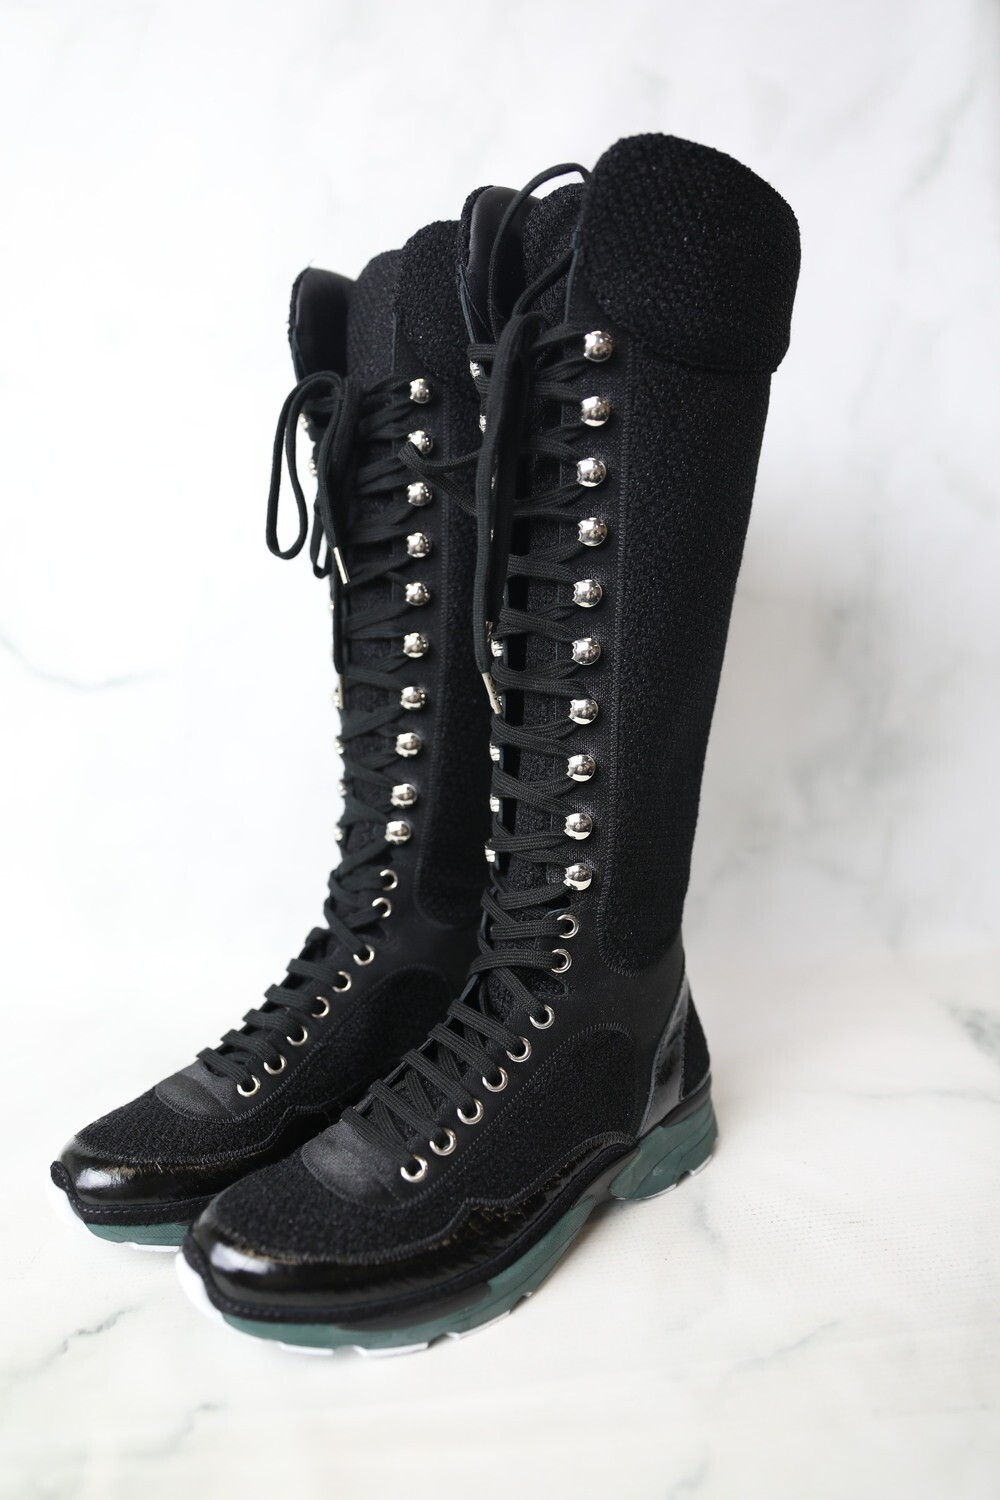 Chanel Shoes Black Tweed Patent Leather Cc Lace Up Sneakers Tall  Boots/Booties, New in Box WA001